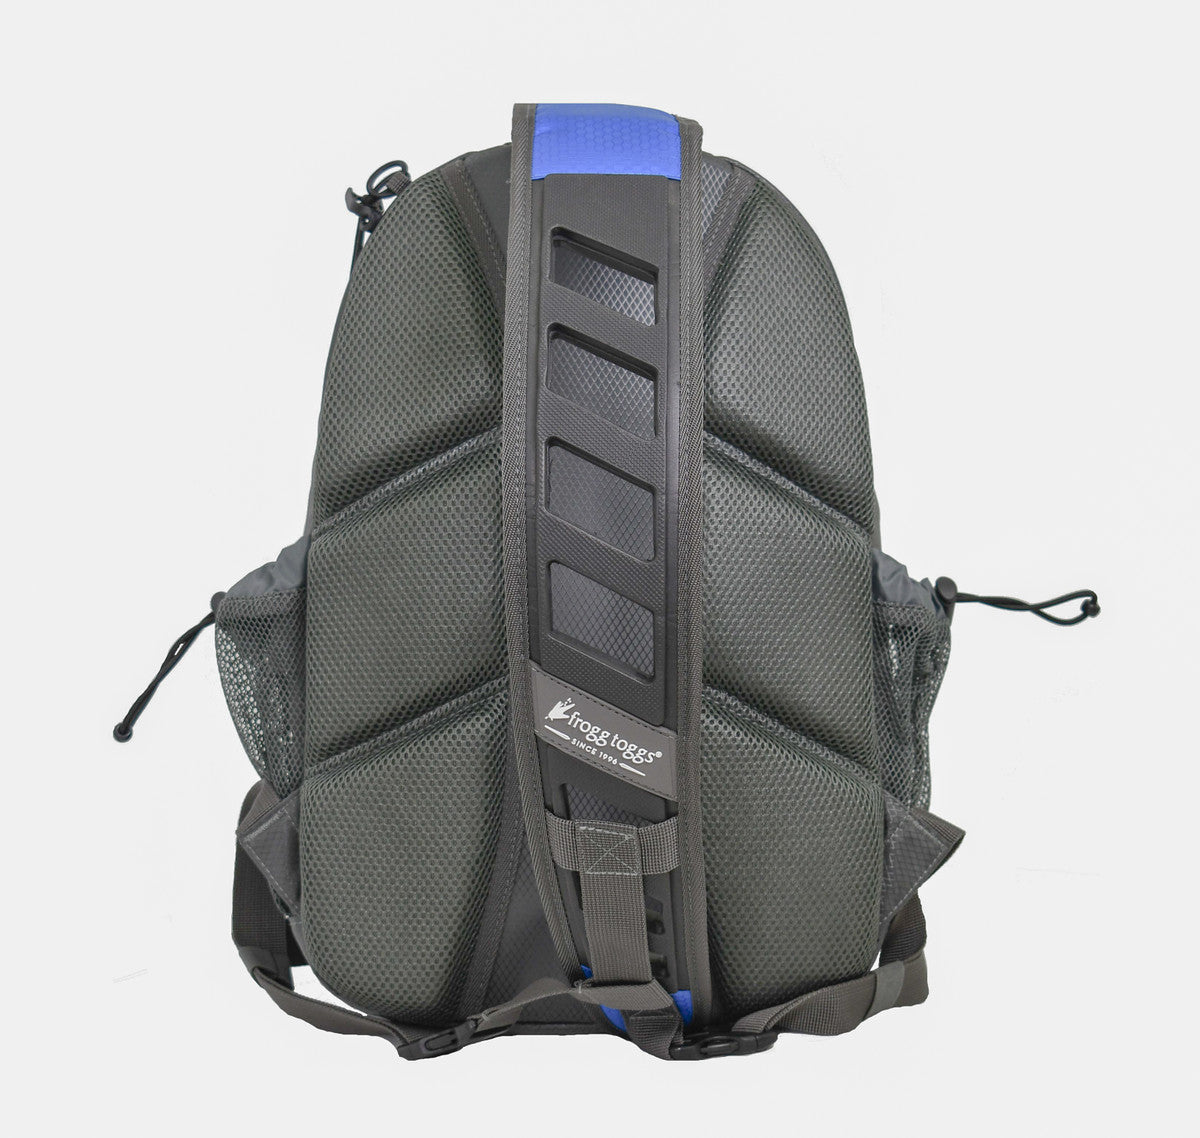 FROGG TOGG SLING PACK BLUE 1 3600 TACKLE TRAY INCLUDED